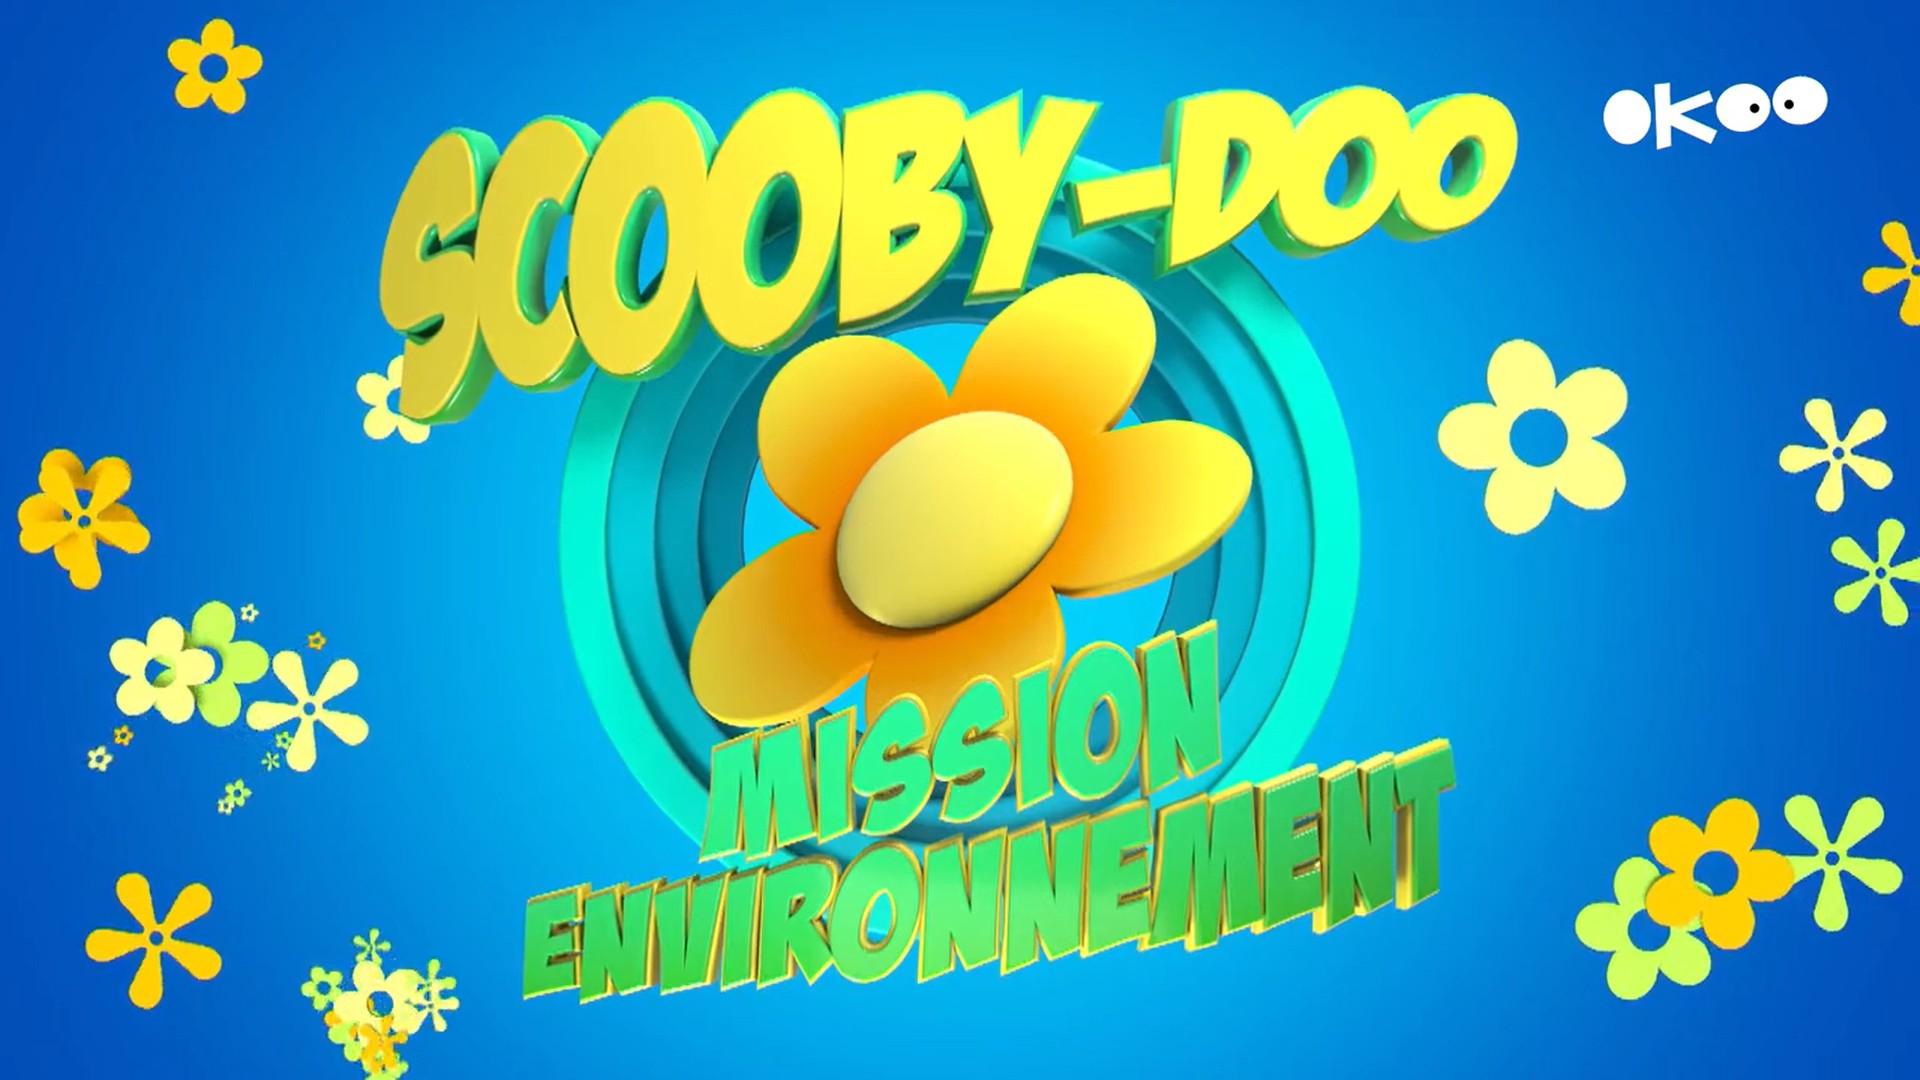 Scooby-Doo's Ecological Mission